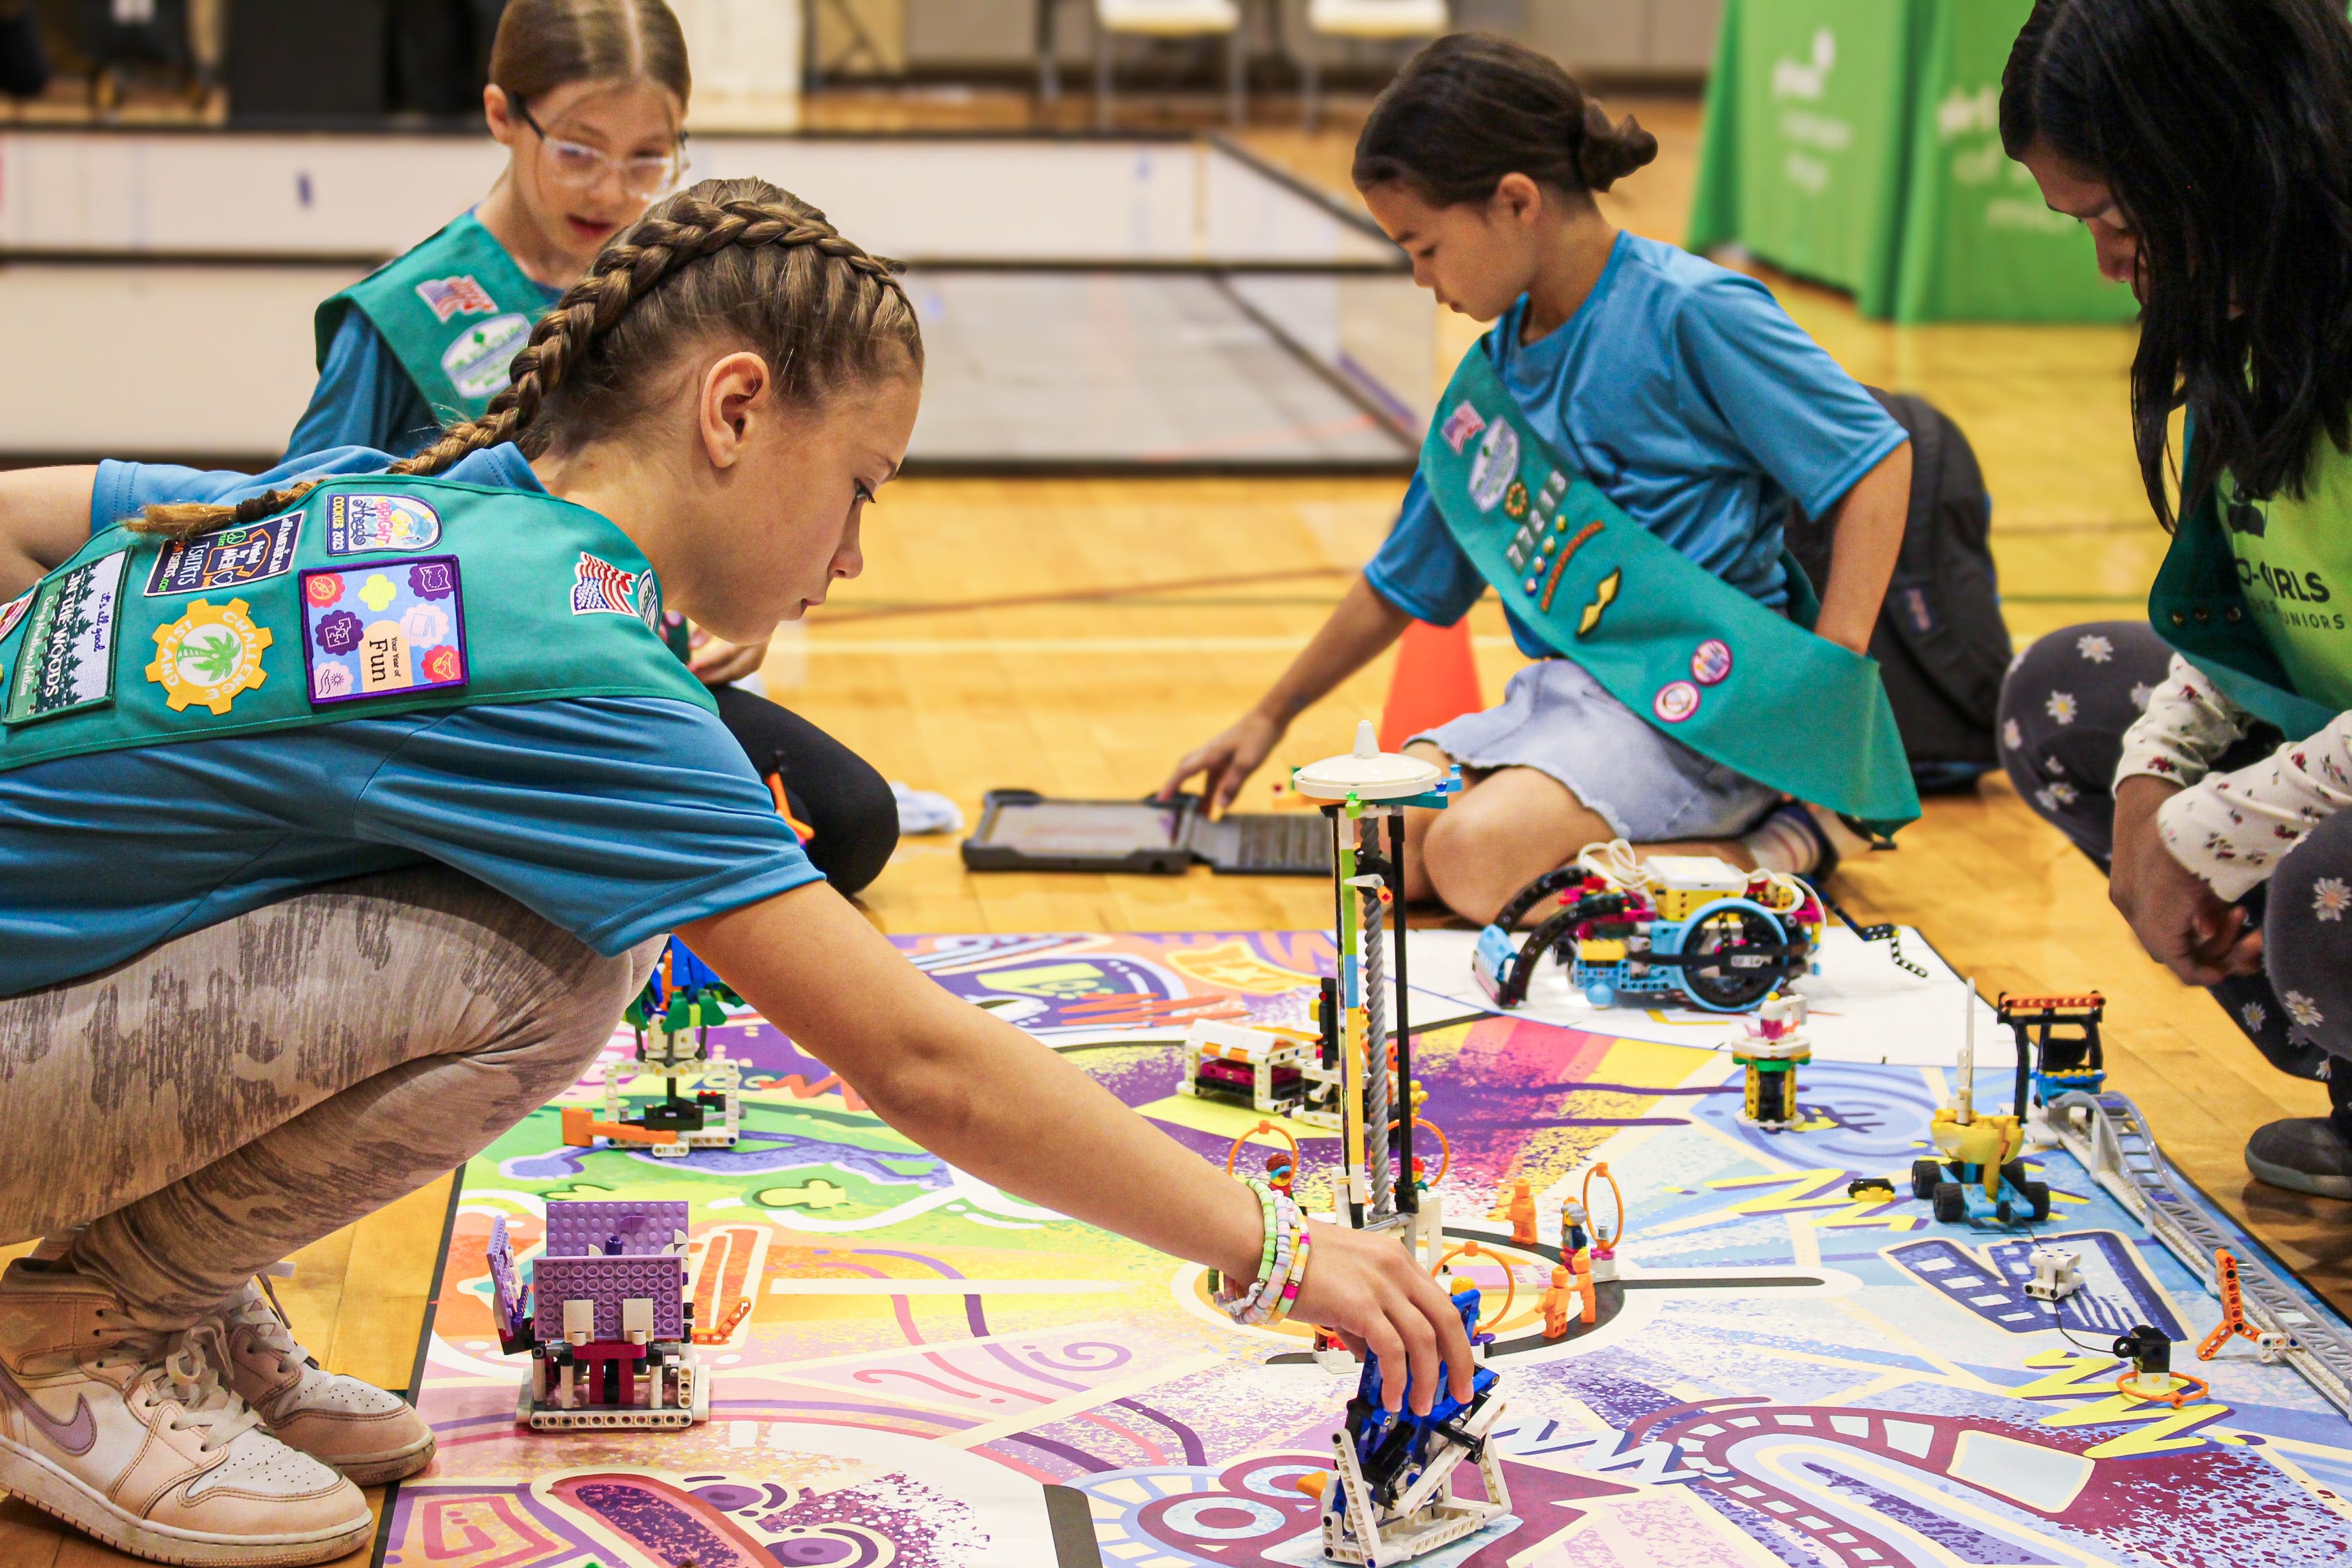 Detroit office helps metro Detroit Girl Scouts go places, including California